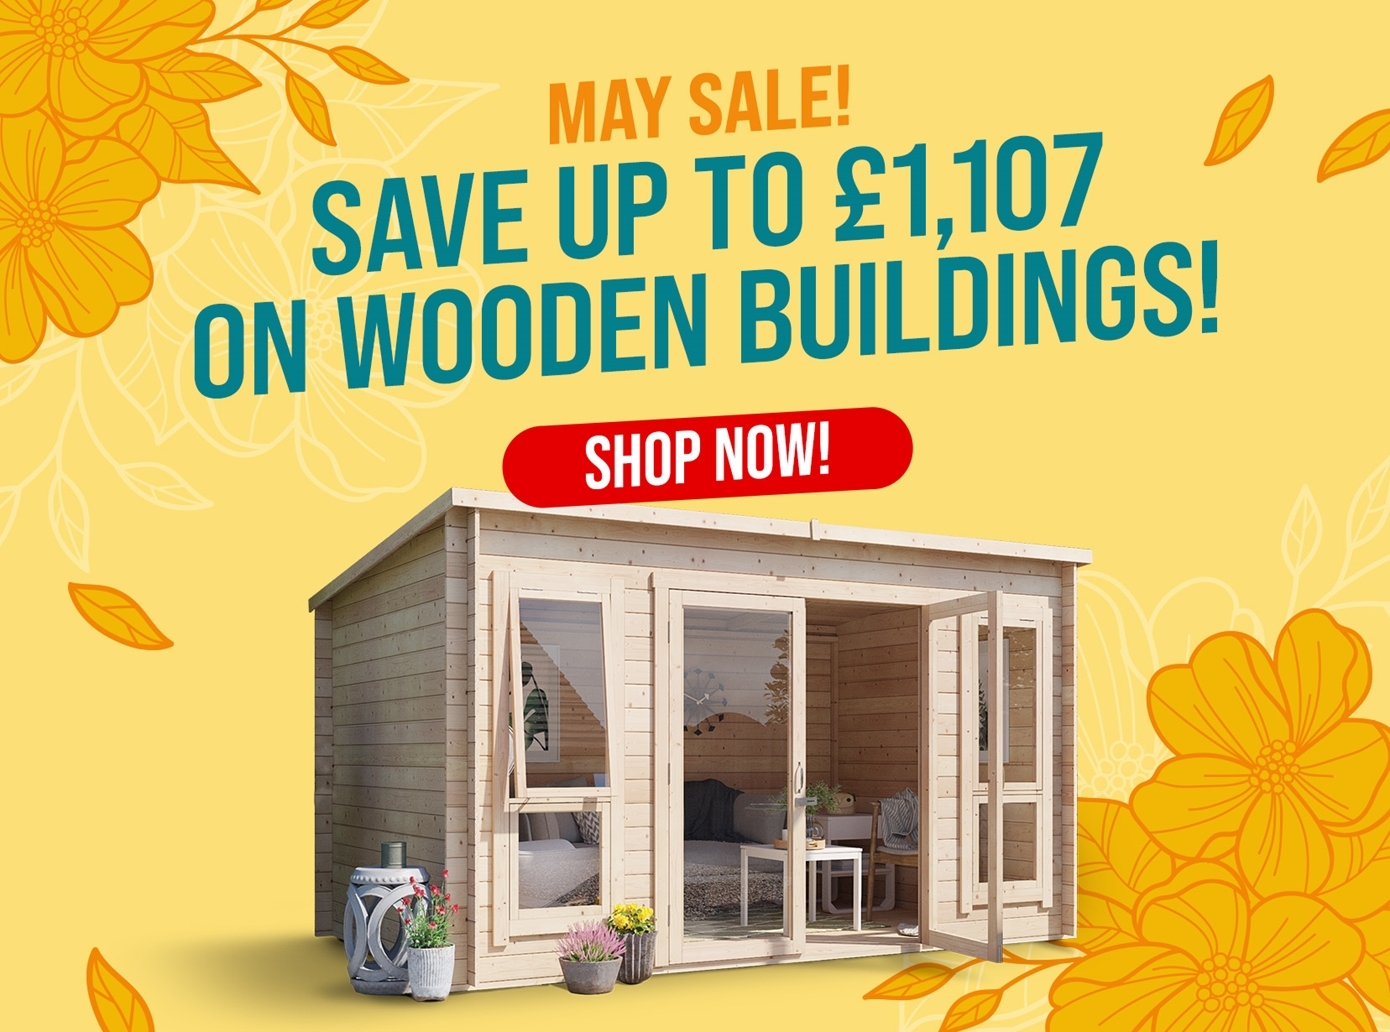 May sale! save up to 1107 on wooden buildings